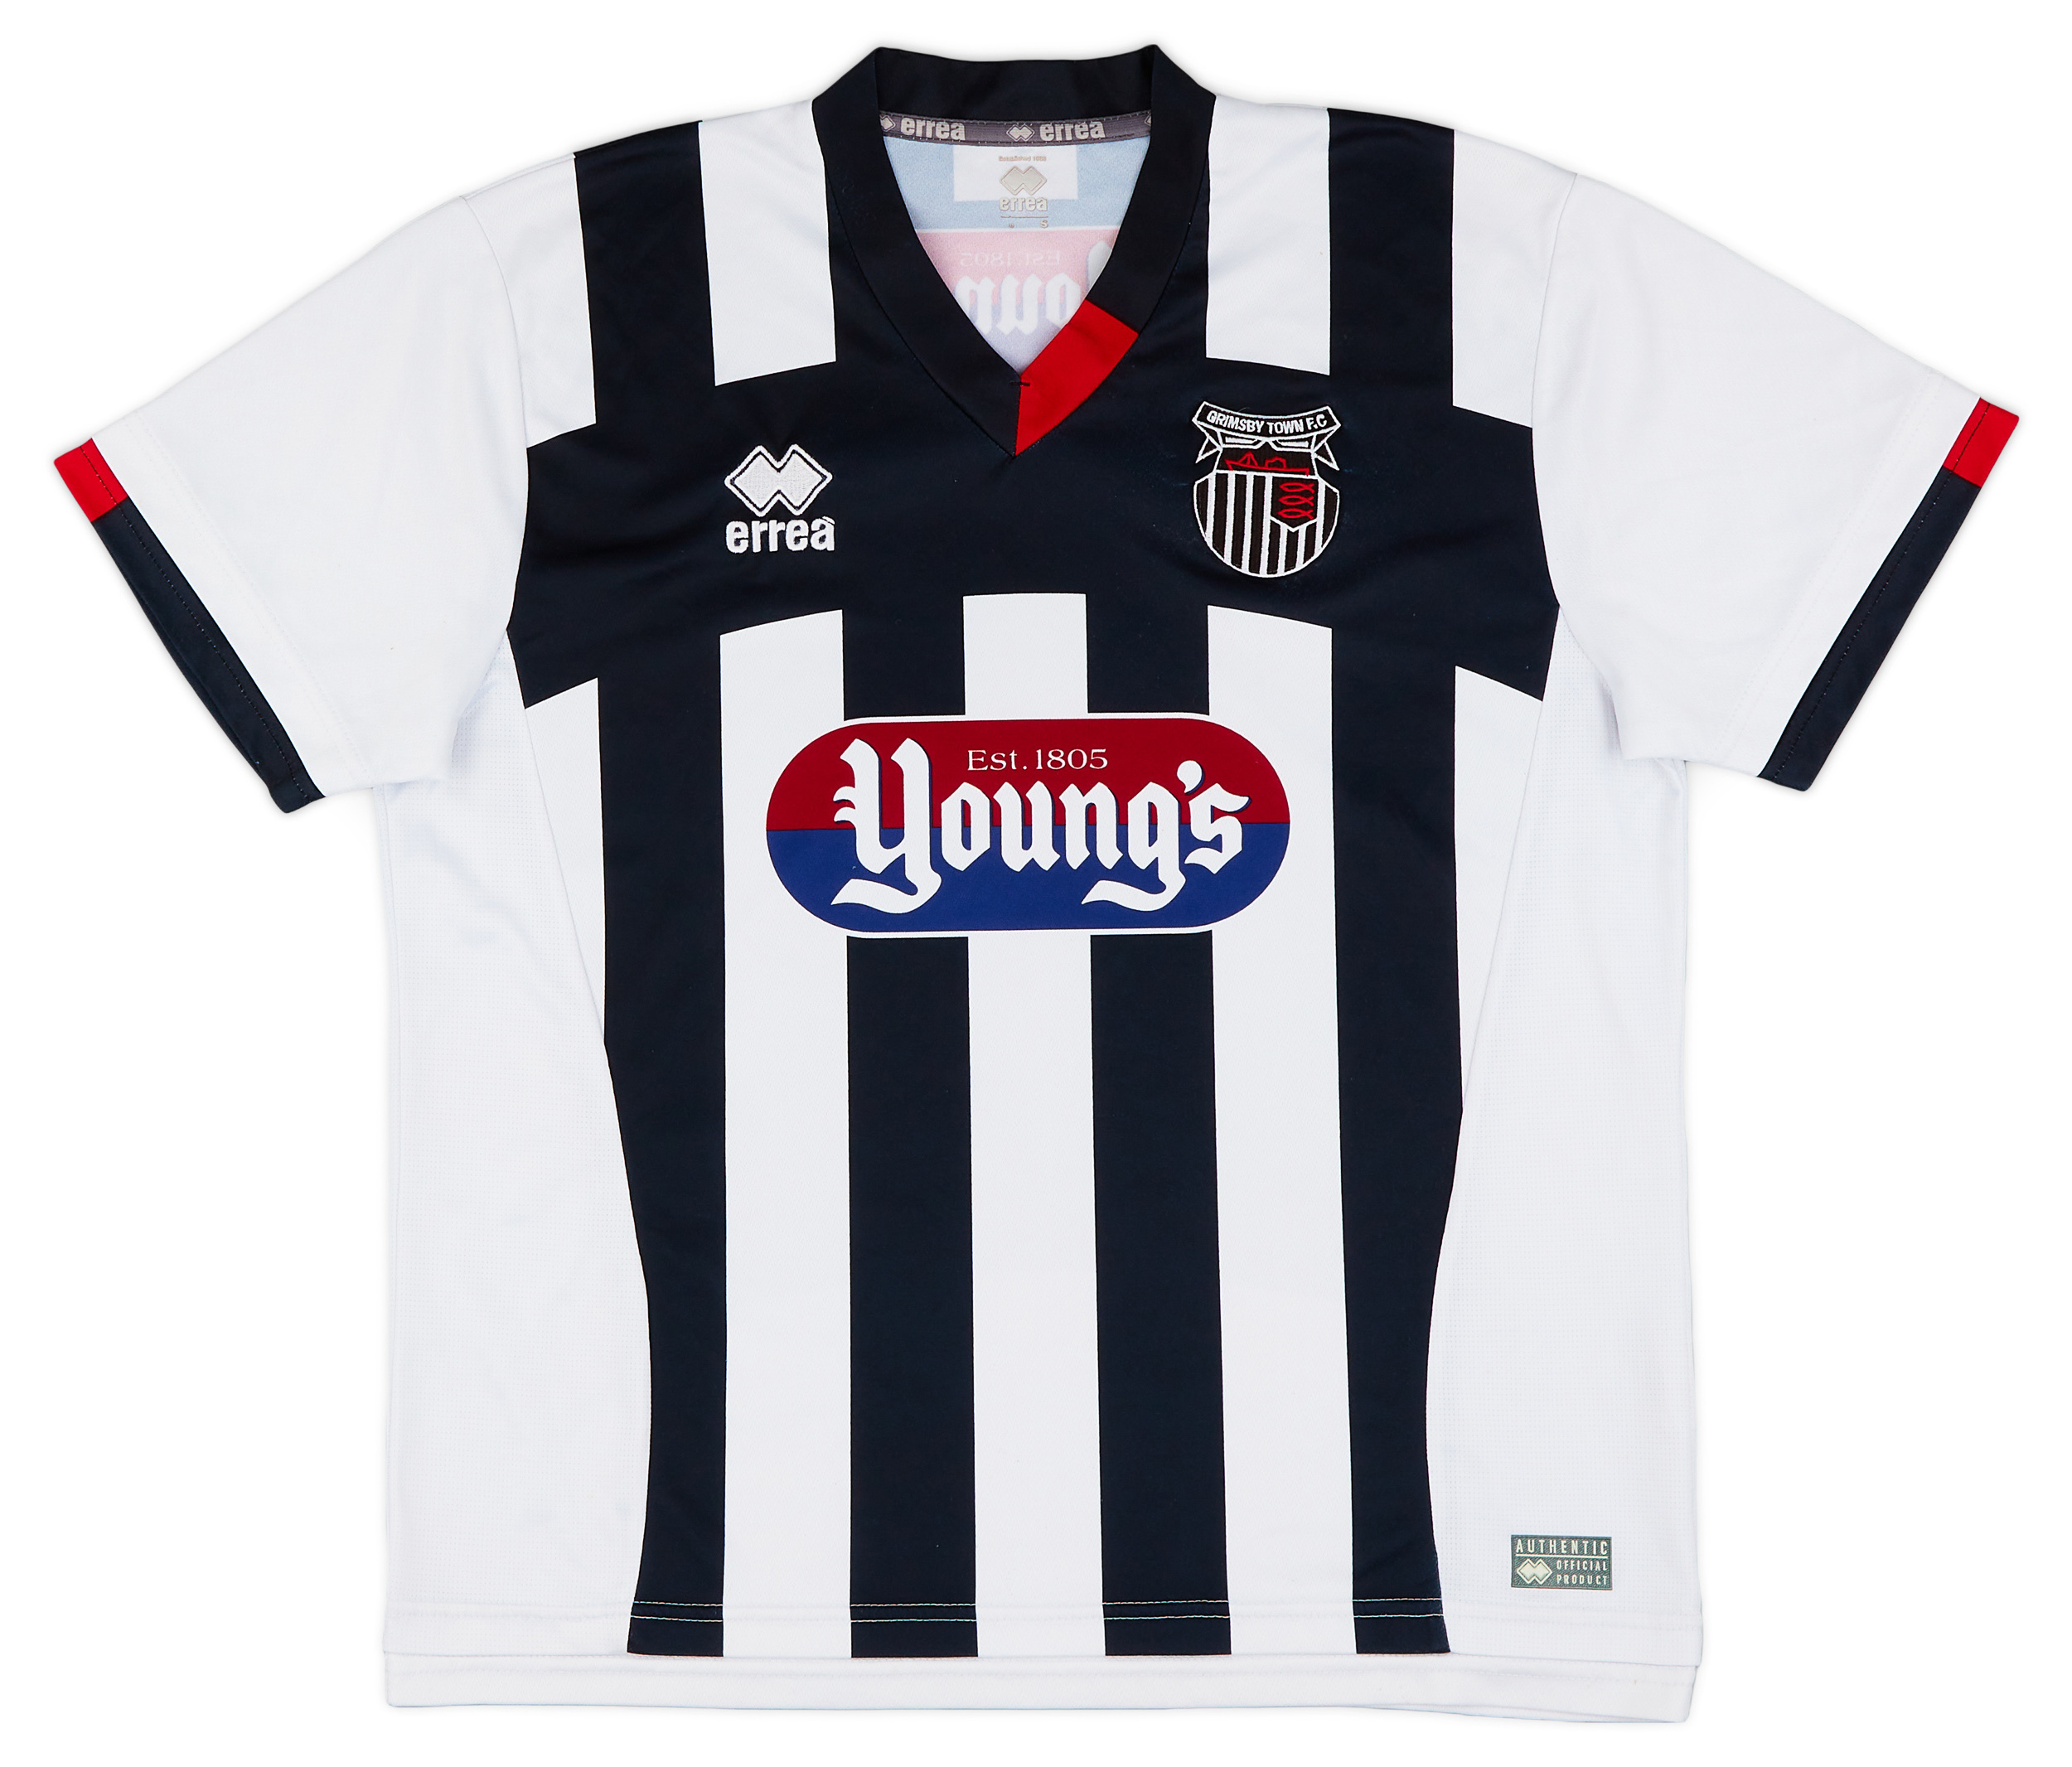 2015-16 Grimsby Town Home Shirt - 8/10 - ()